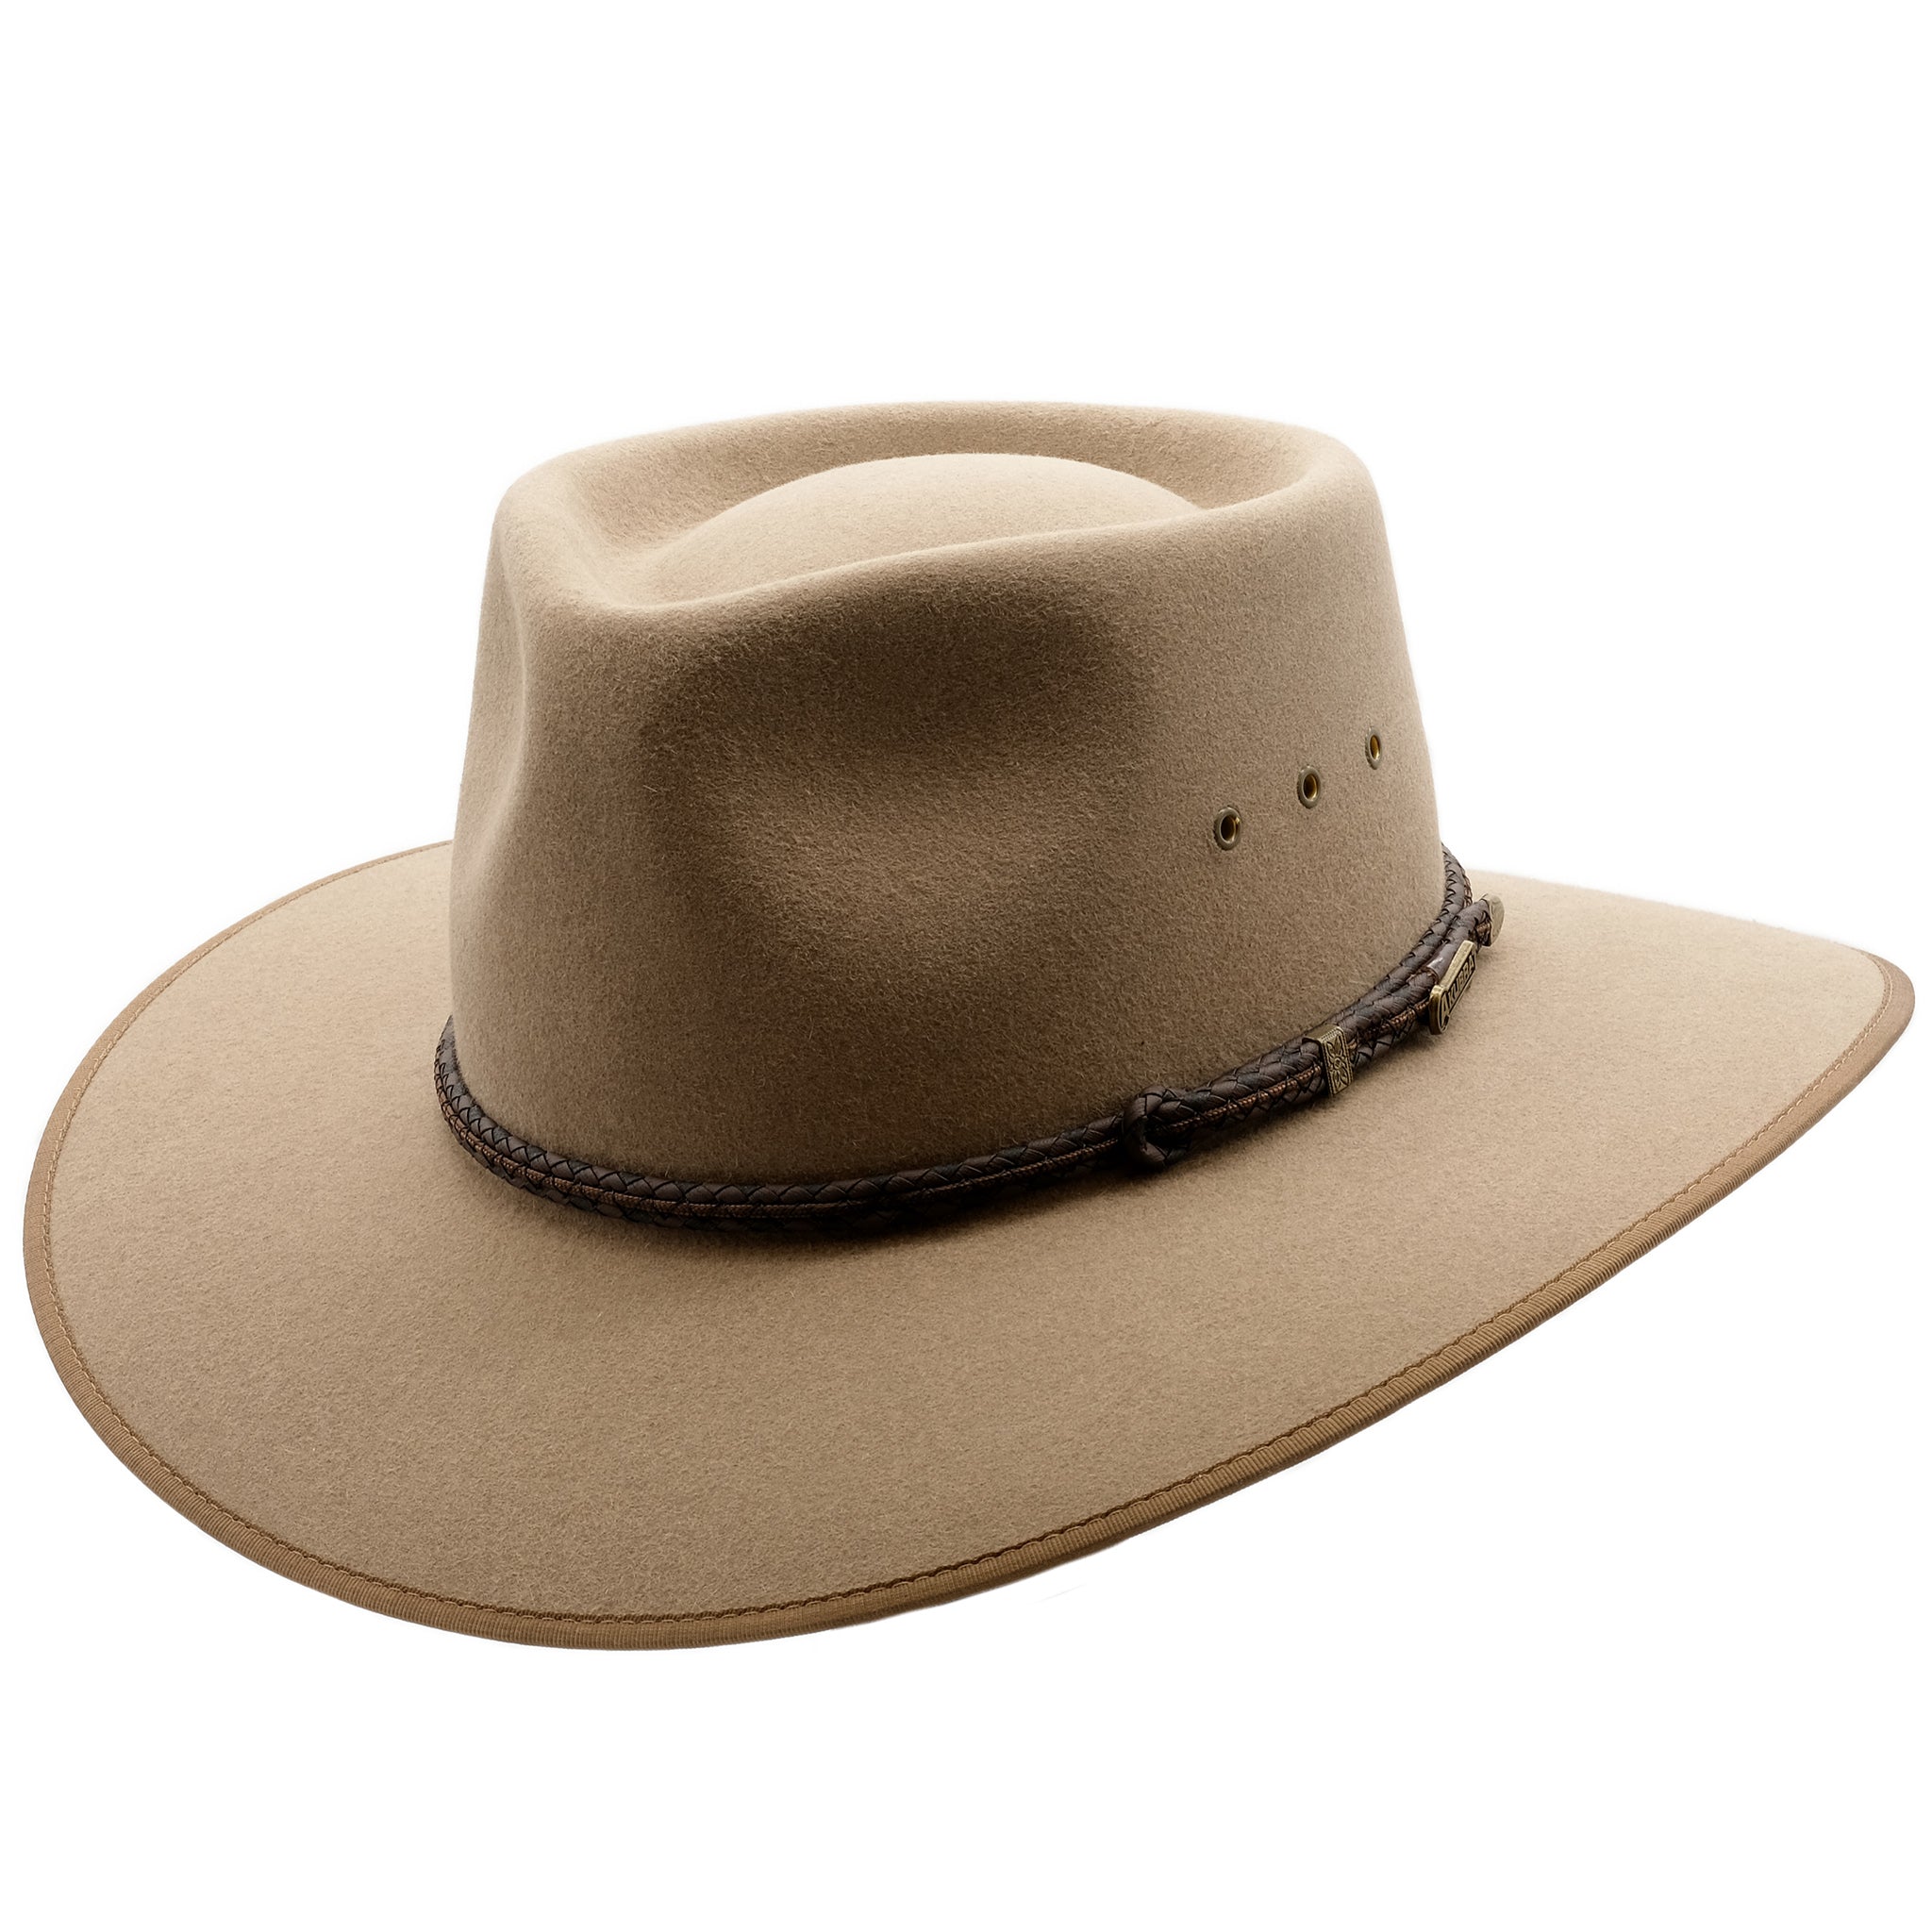 Angle view of the Akubra Cattleman hat in Bran colour